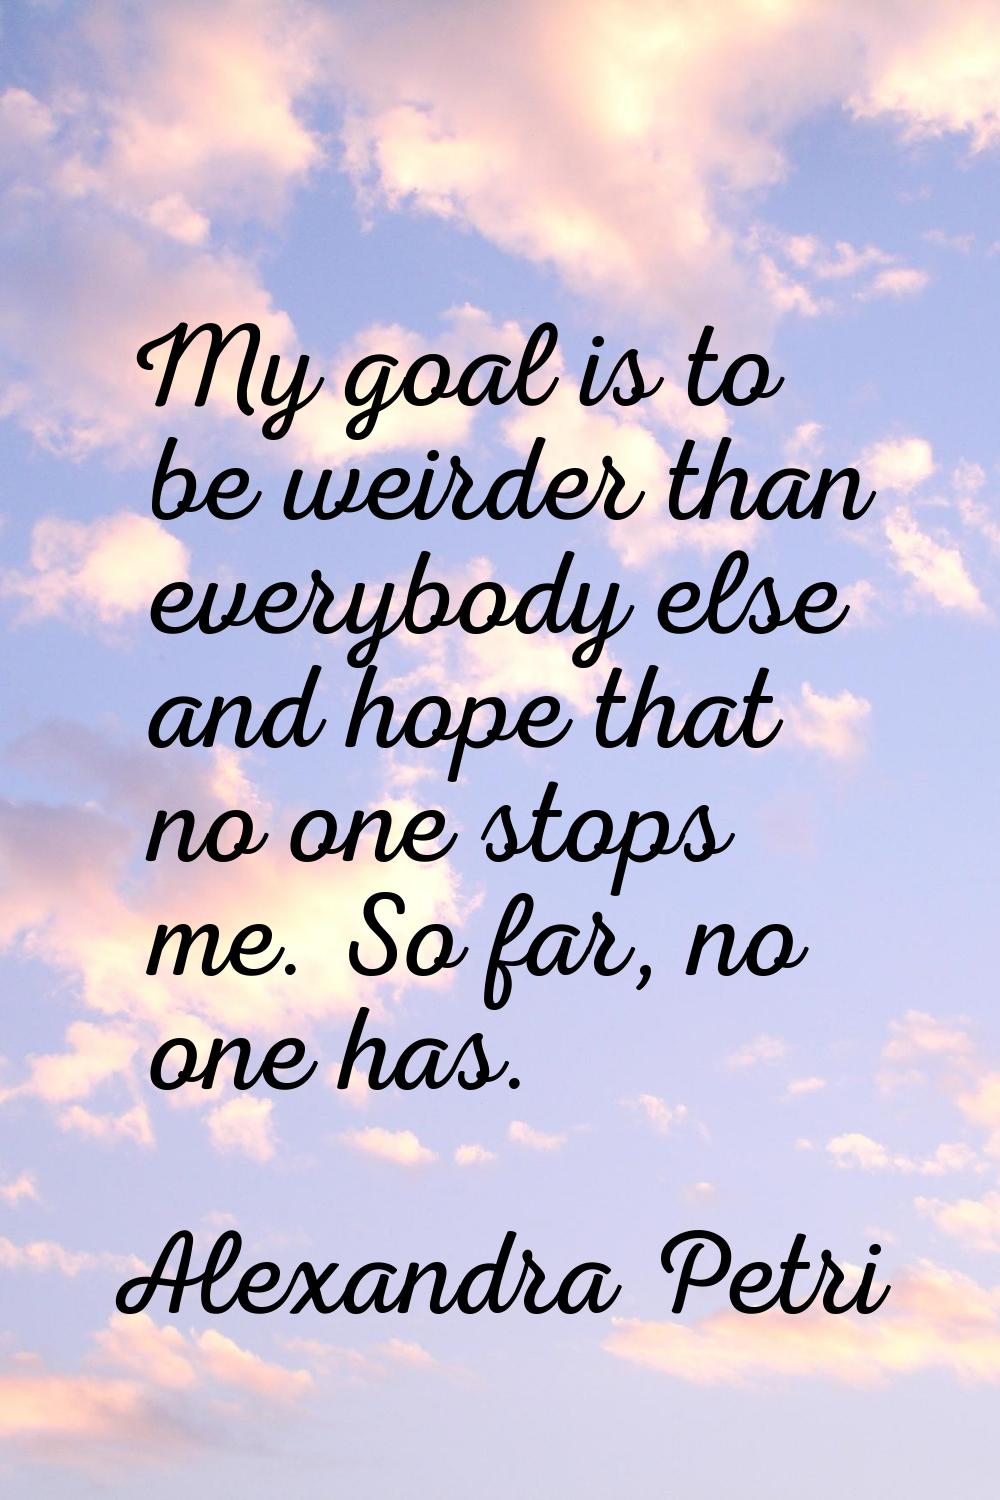 My goal is to be weirder than everybody else and hope that no one stops me. So far, no one has.